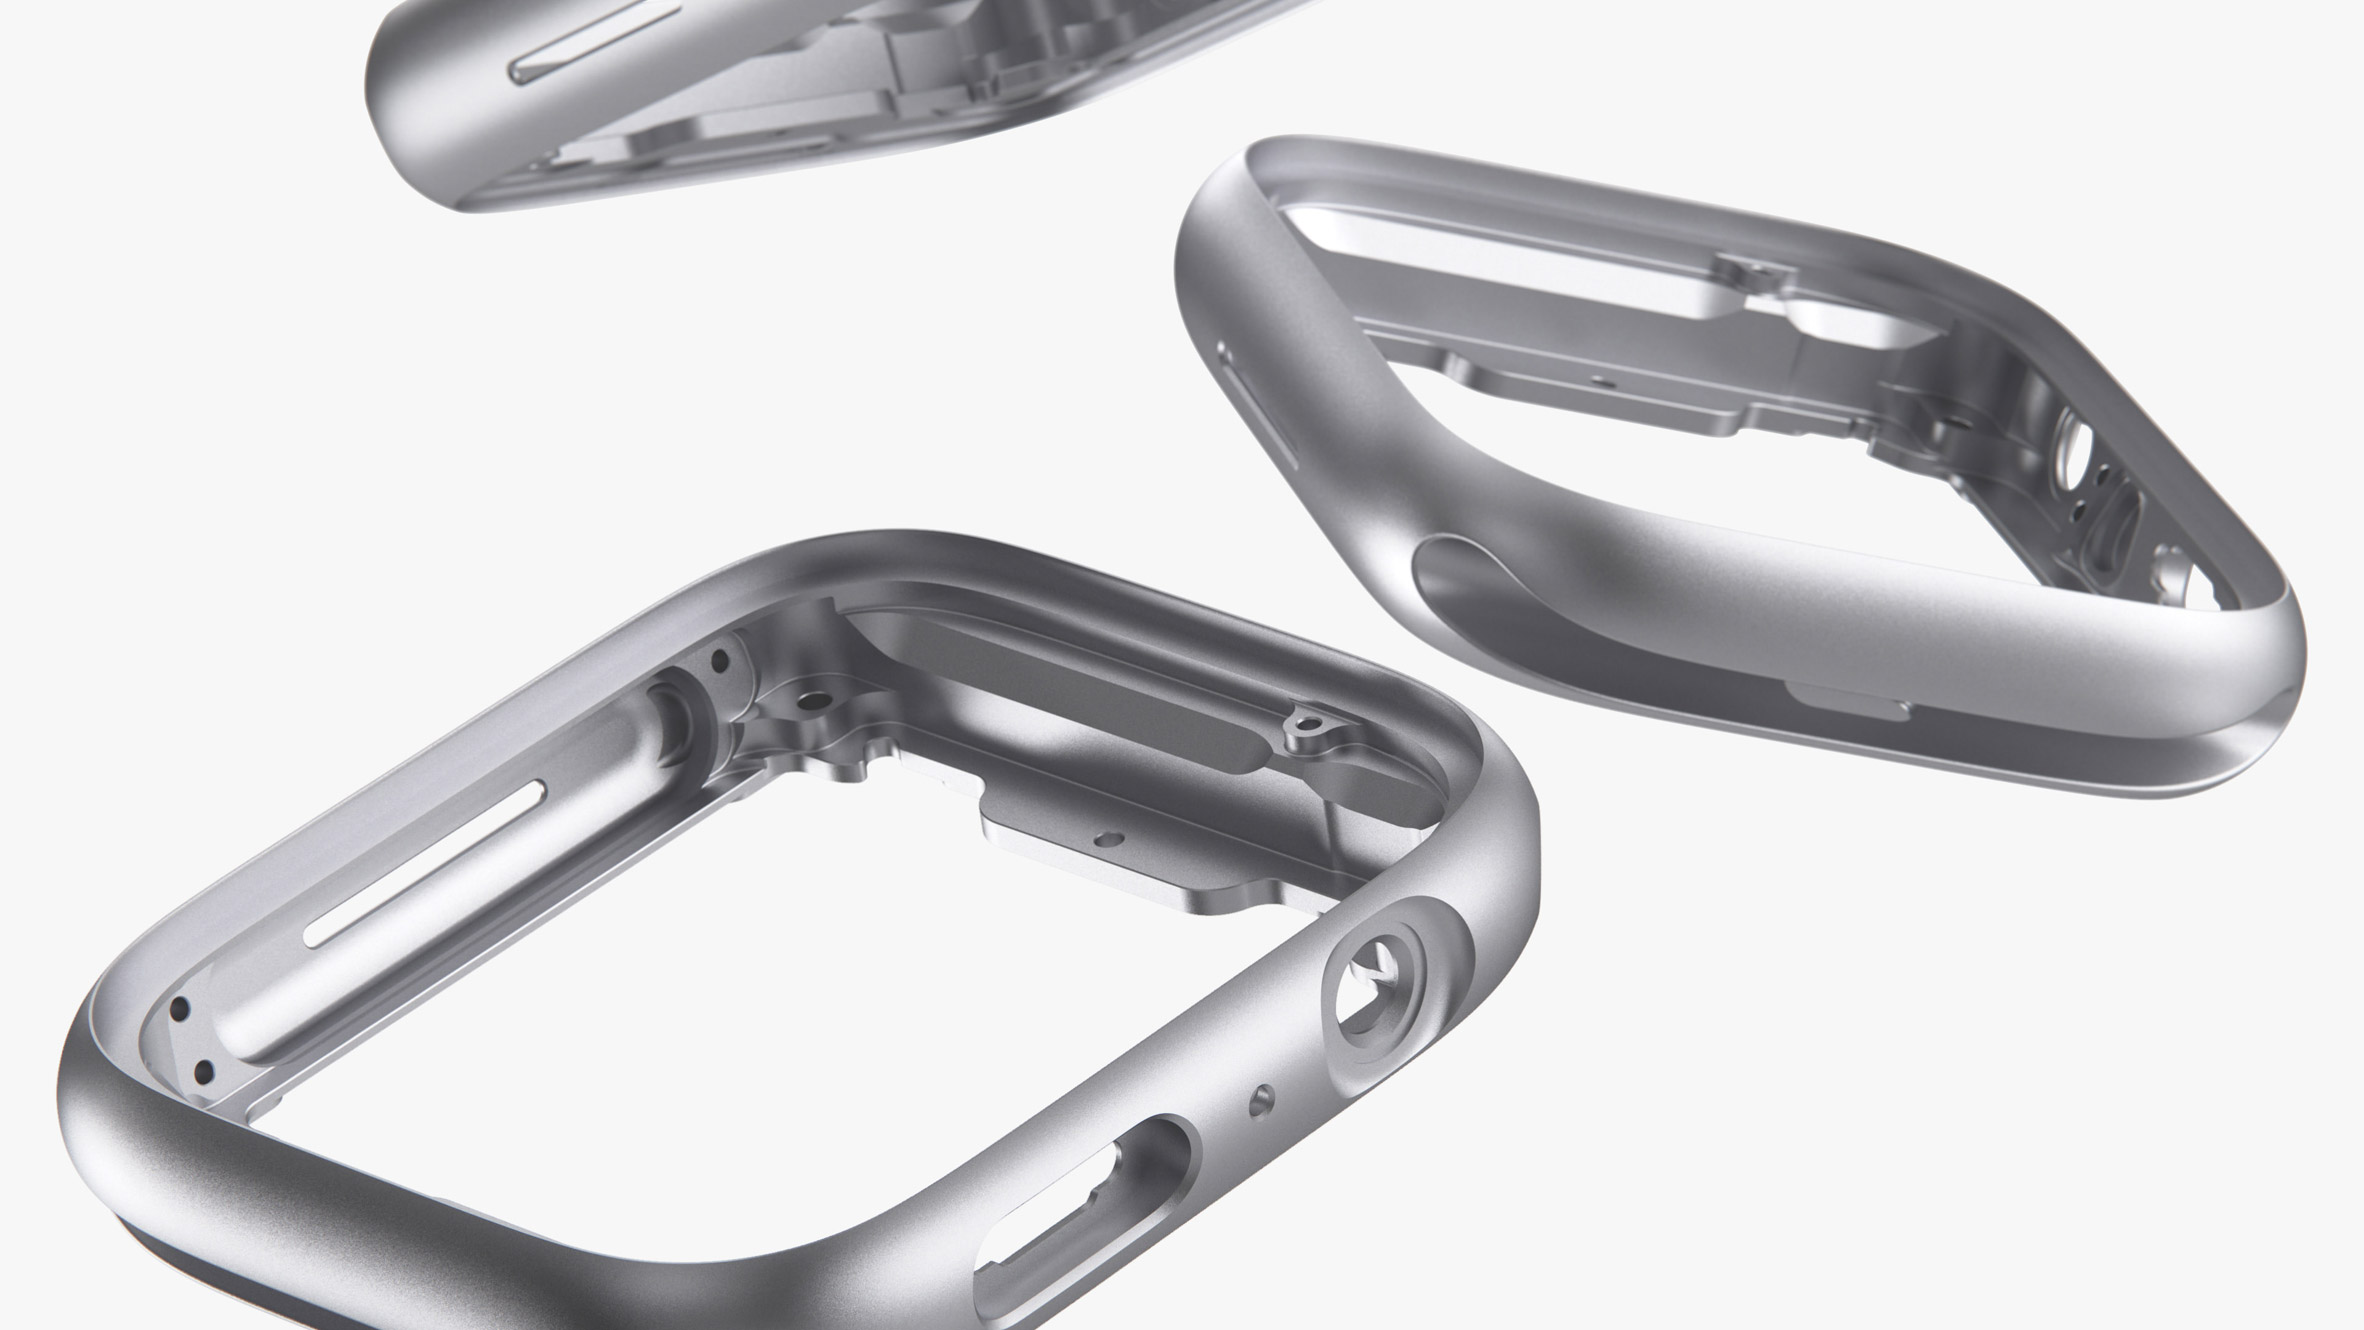 Apple unveils new smartwatches as first carbon-neutral products